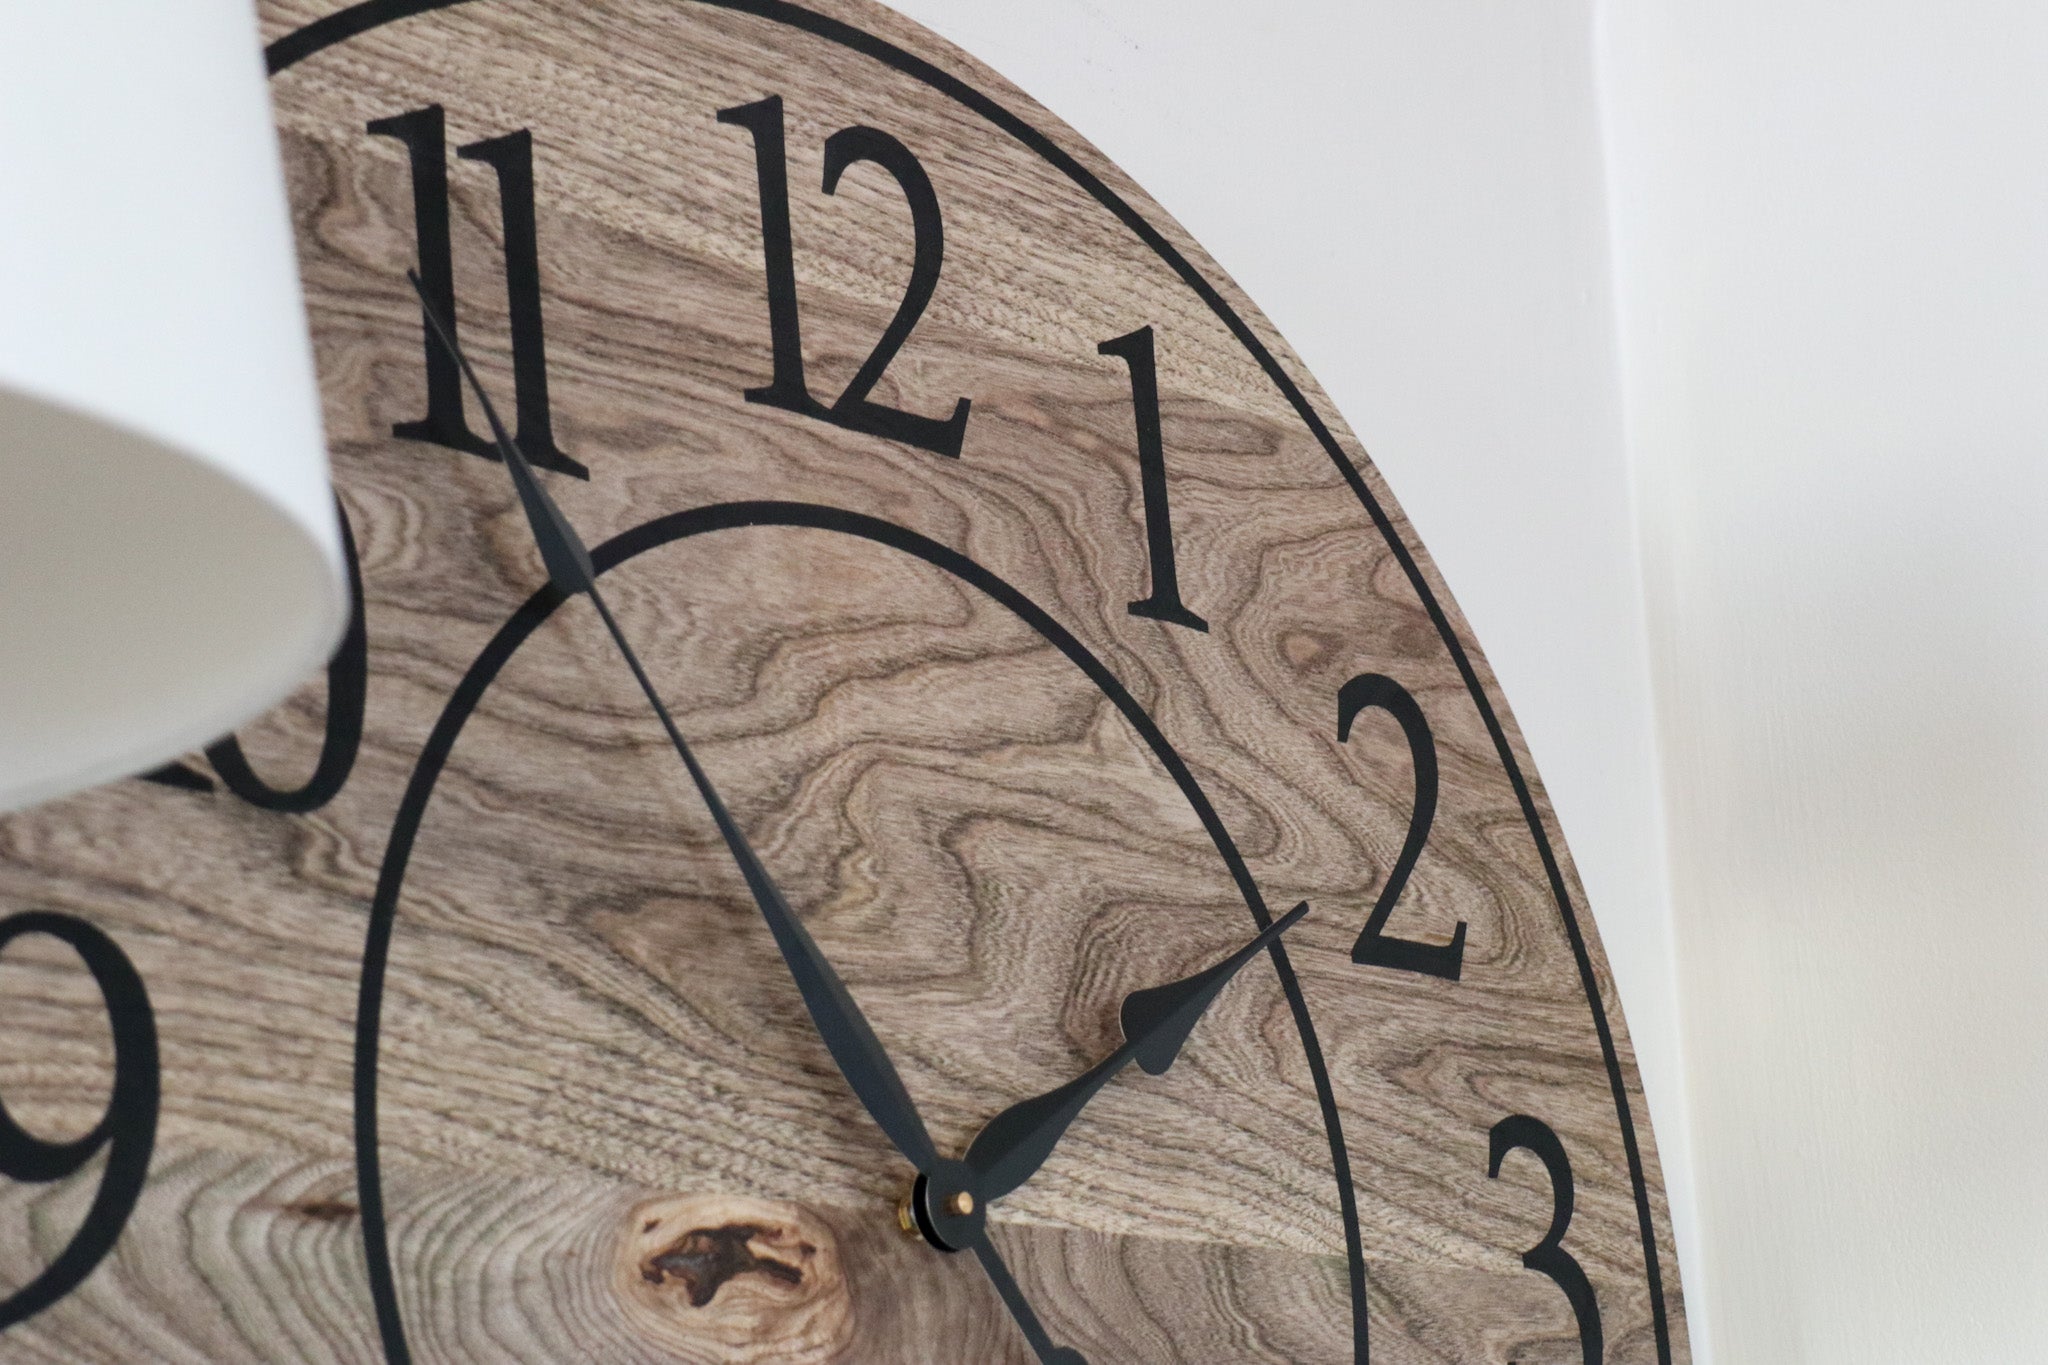 Large Brown Stained Hackberry Wall Clock with Black Numbers - Hazel Oak Farms Handmade Furniture in Iowa, USA